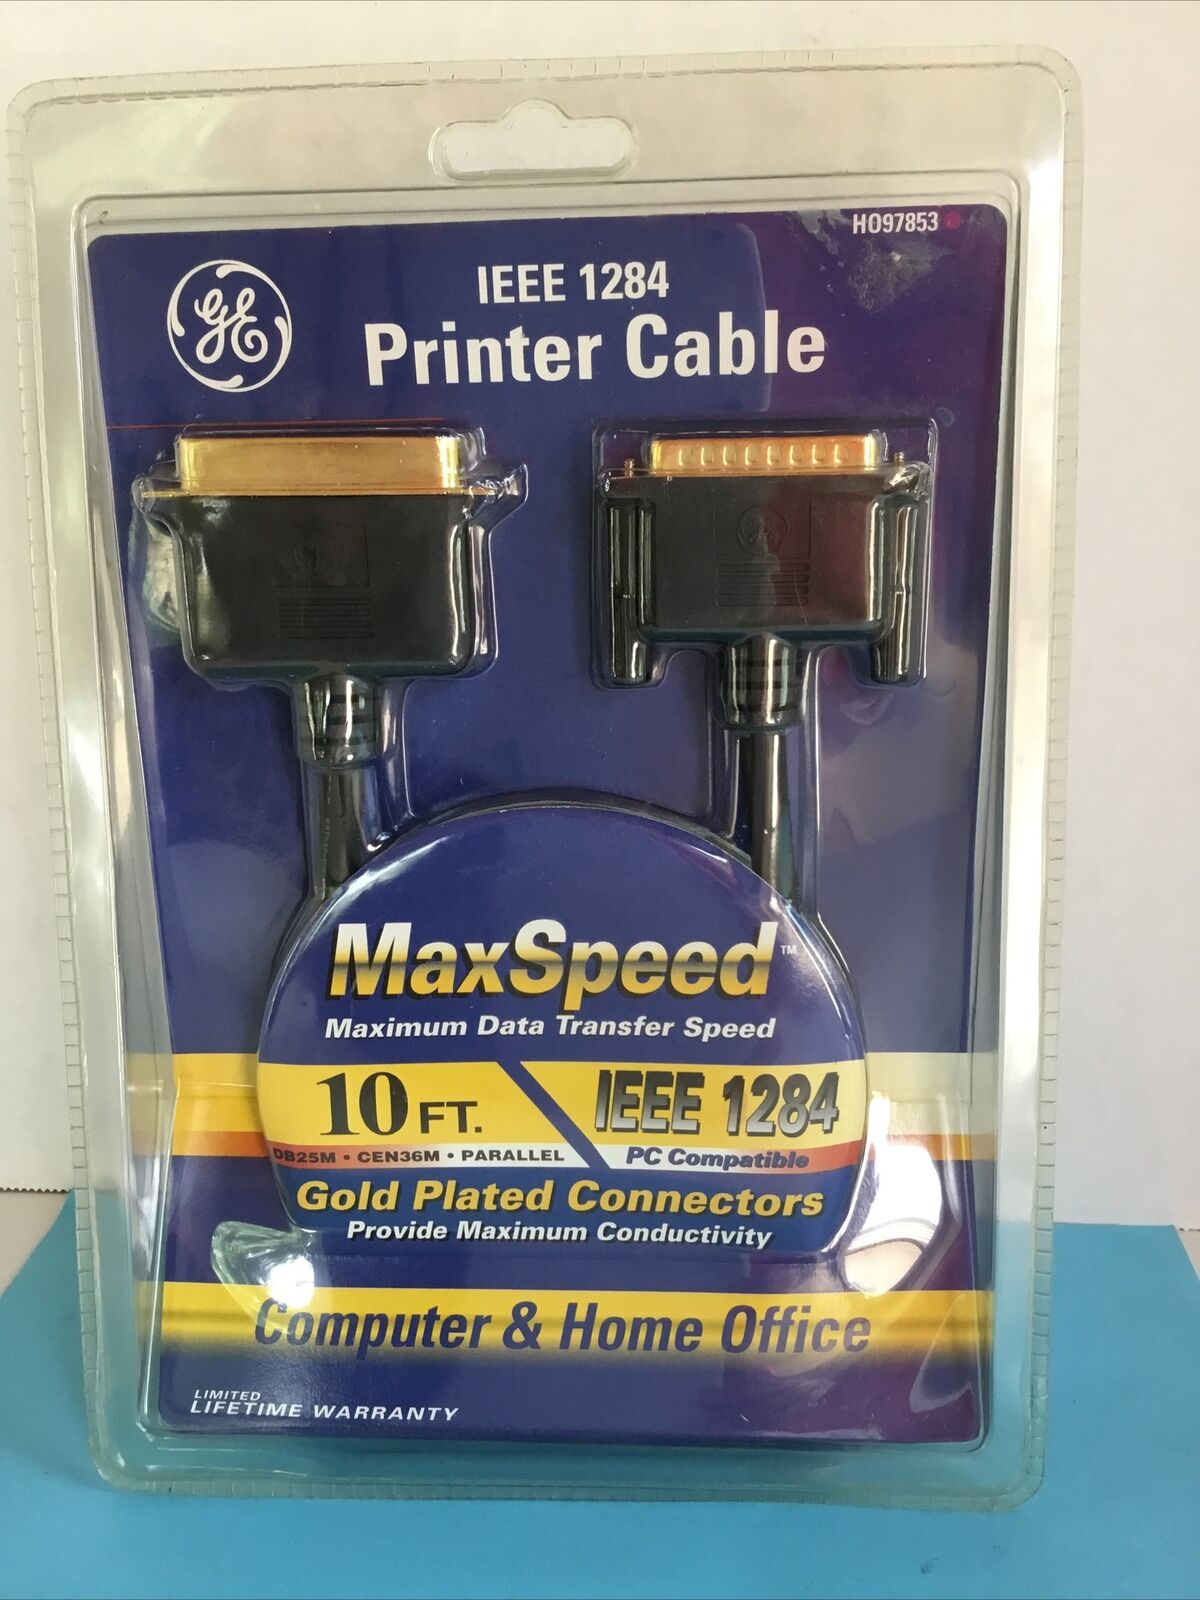 GE 10 feet No. IEEE 1284 Max Speed Gold Plated 36 Pin Printer Cable NIP